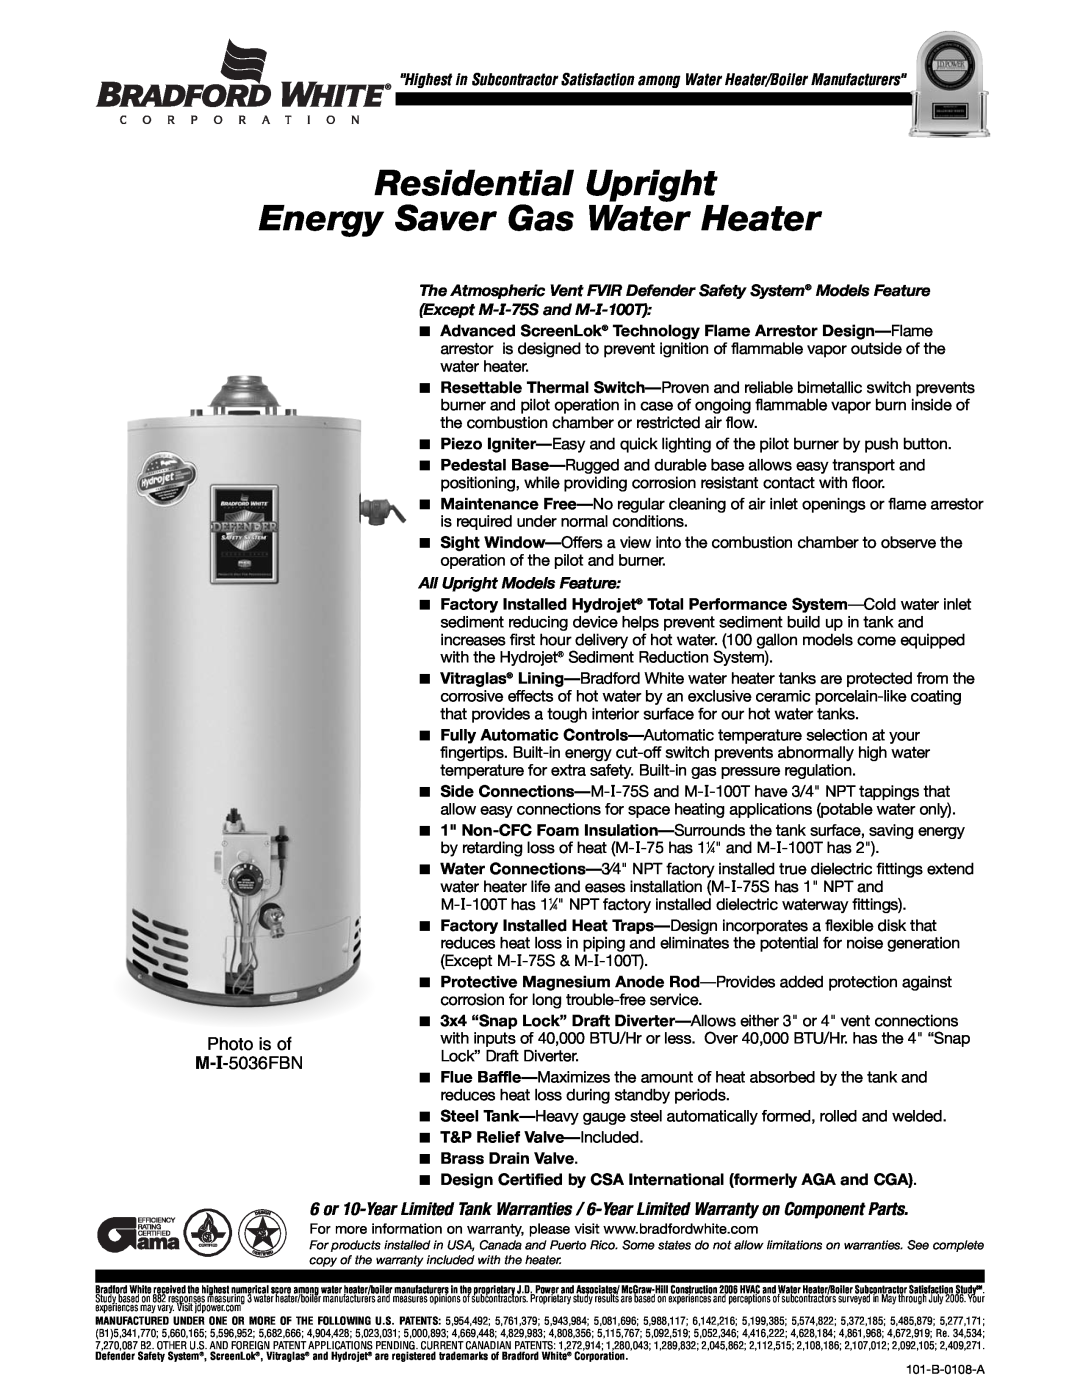 Bradford-White Corp warranty Residential Upright Energy Saver Gas Water Heater, Photo is of M-I-5036FBN 